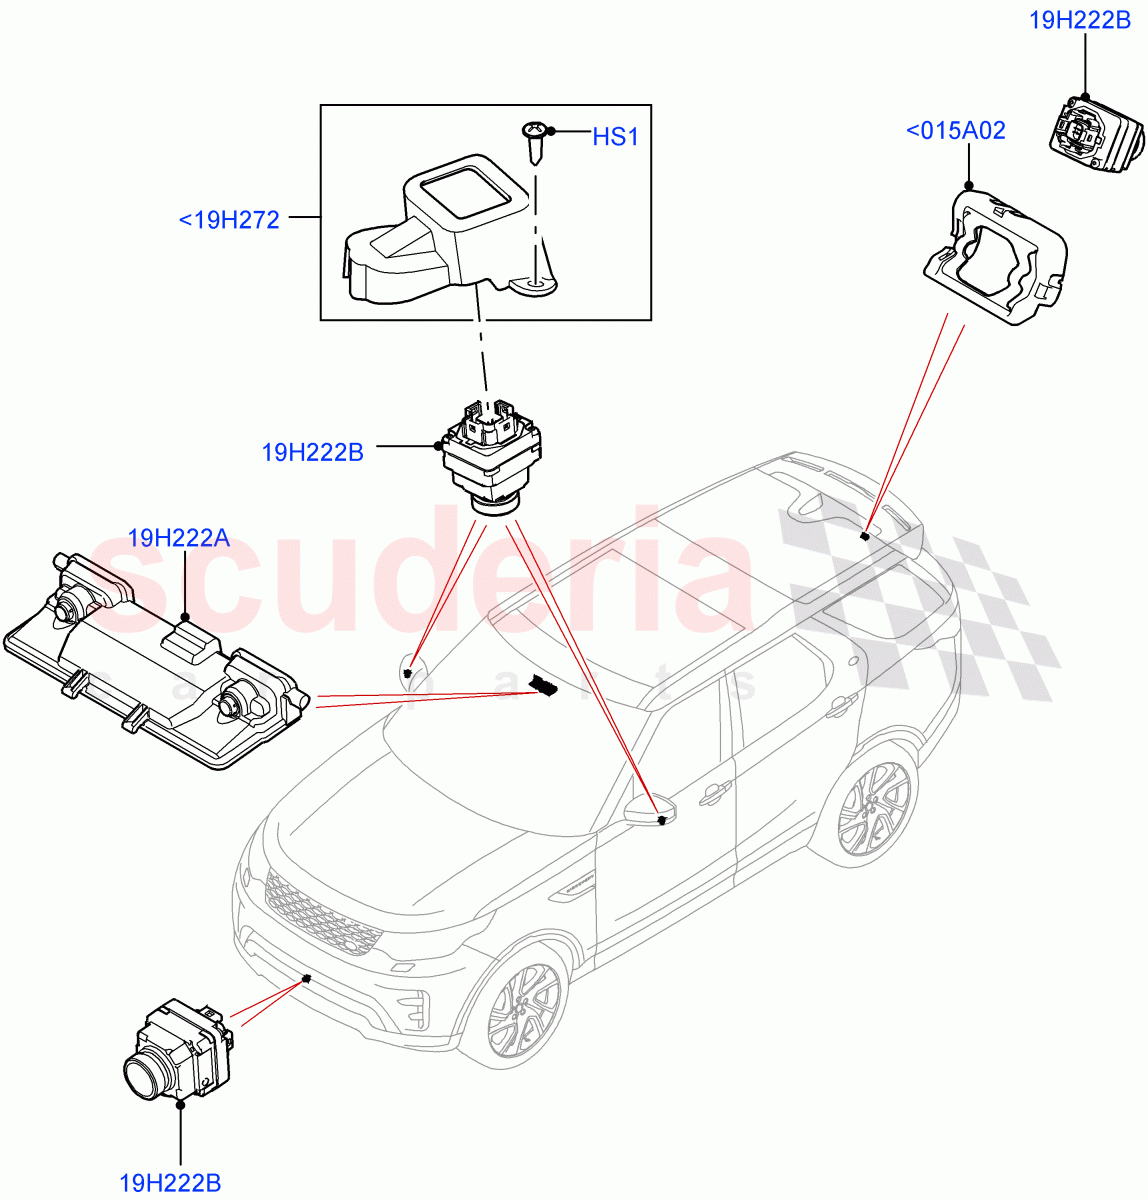 Camera Equipment(Nitra Plant Build)((V)FROMM2000001) of Land Rover Land Rover Discovery 5 (2017+) [2.0 Turbo Diesel]